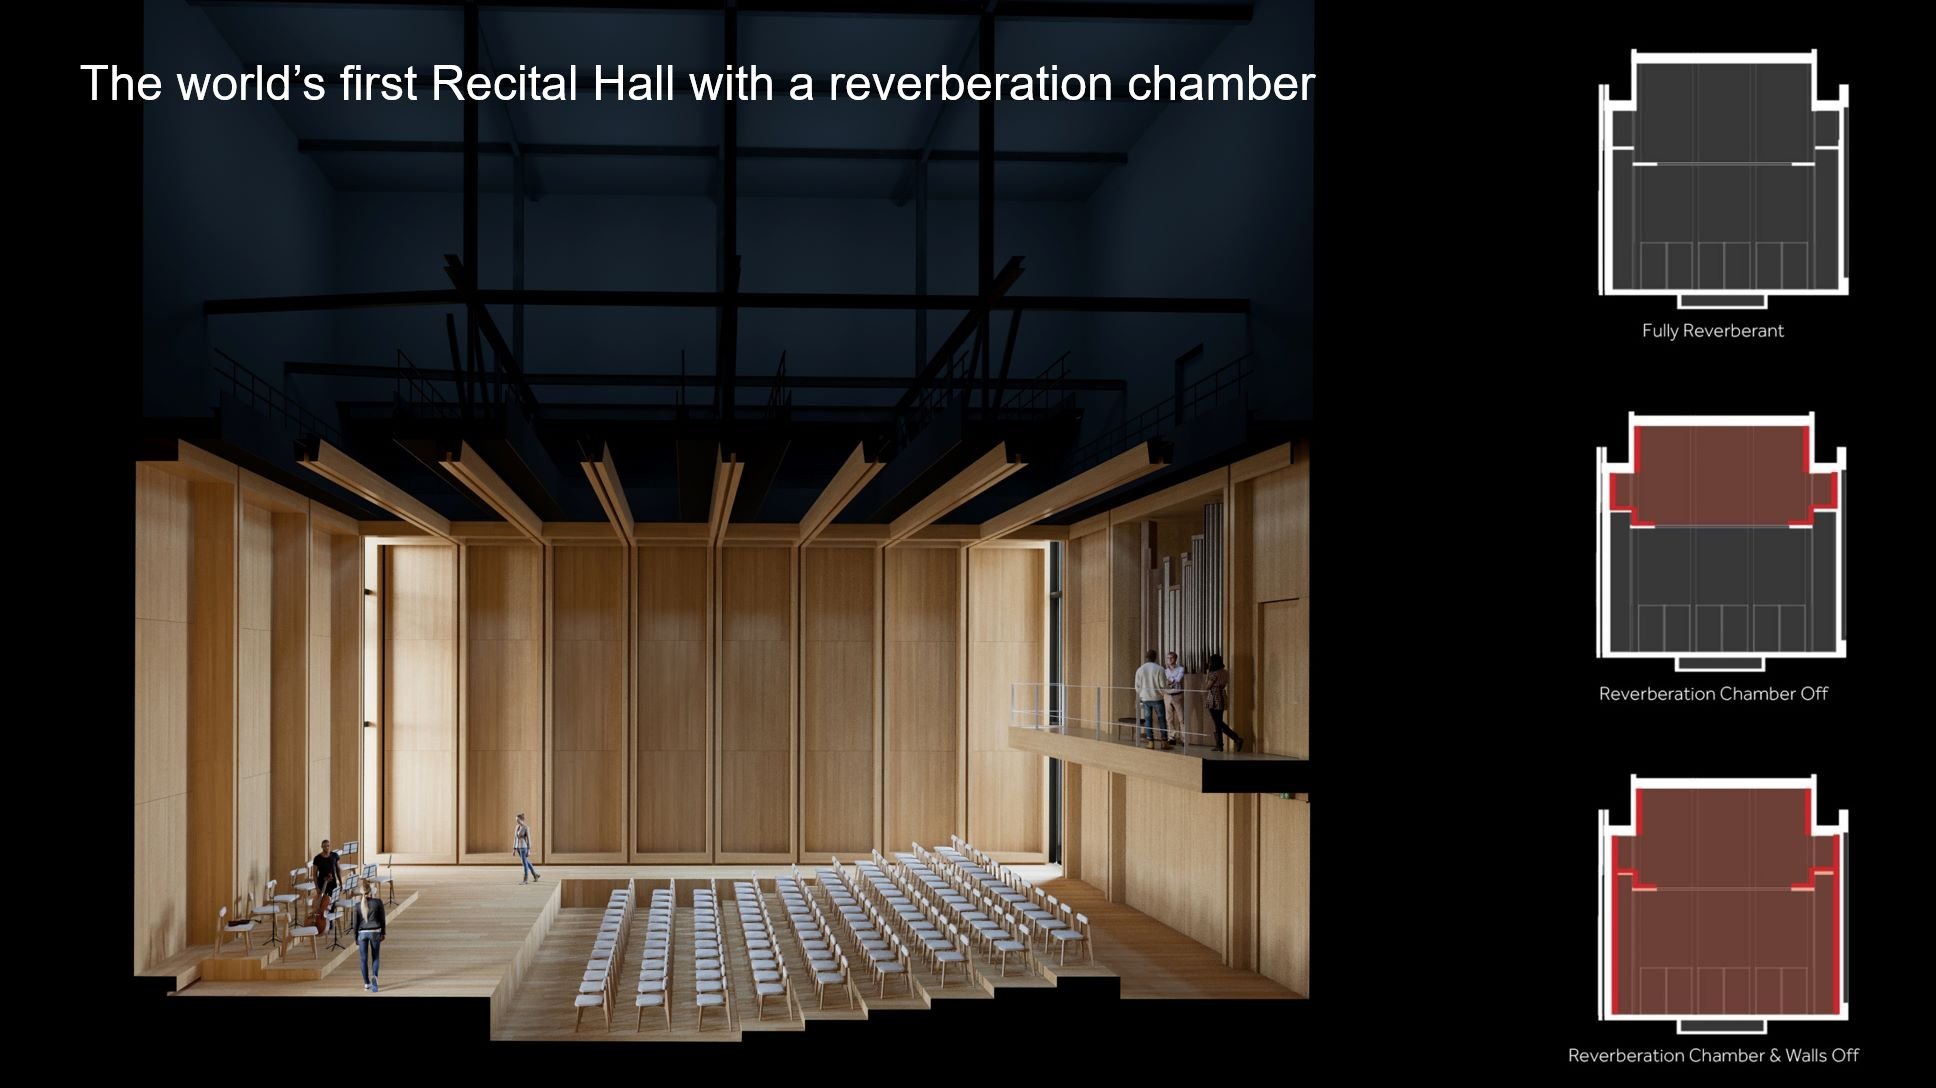 Long Section through the McPherson Recital Hall - the world's first chamber hall with a reverberation chamber | Flanagan Lawrence